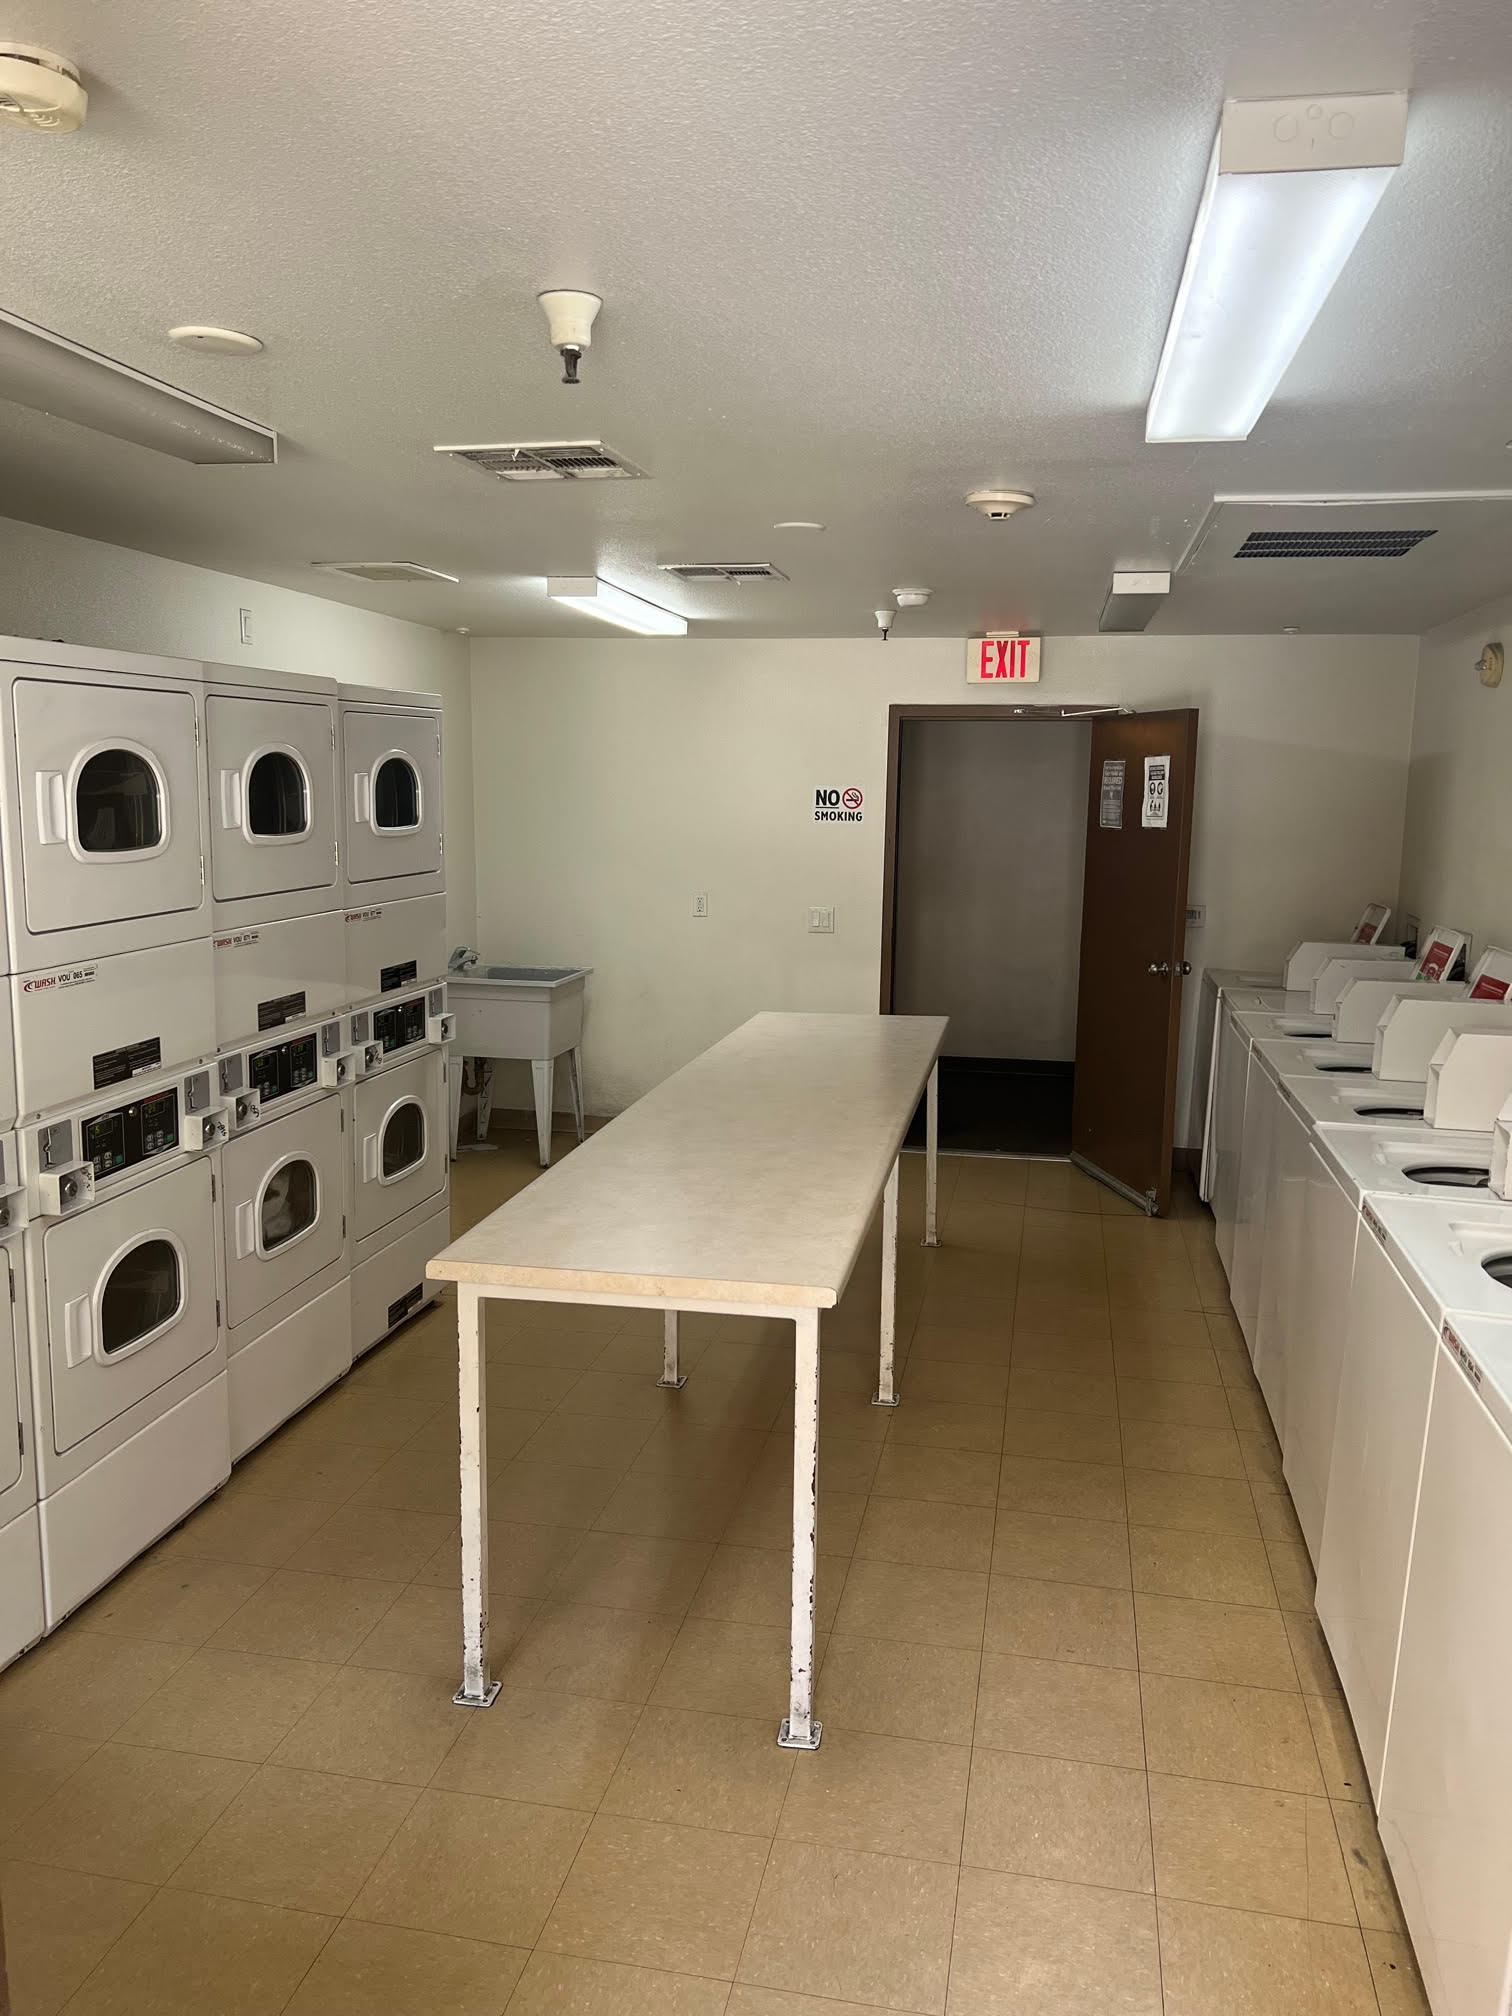 Photo of laundry room showing multiple washers and dryers